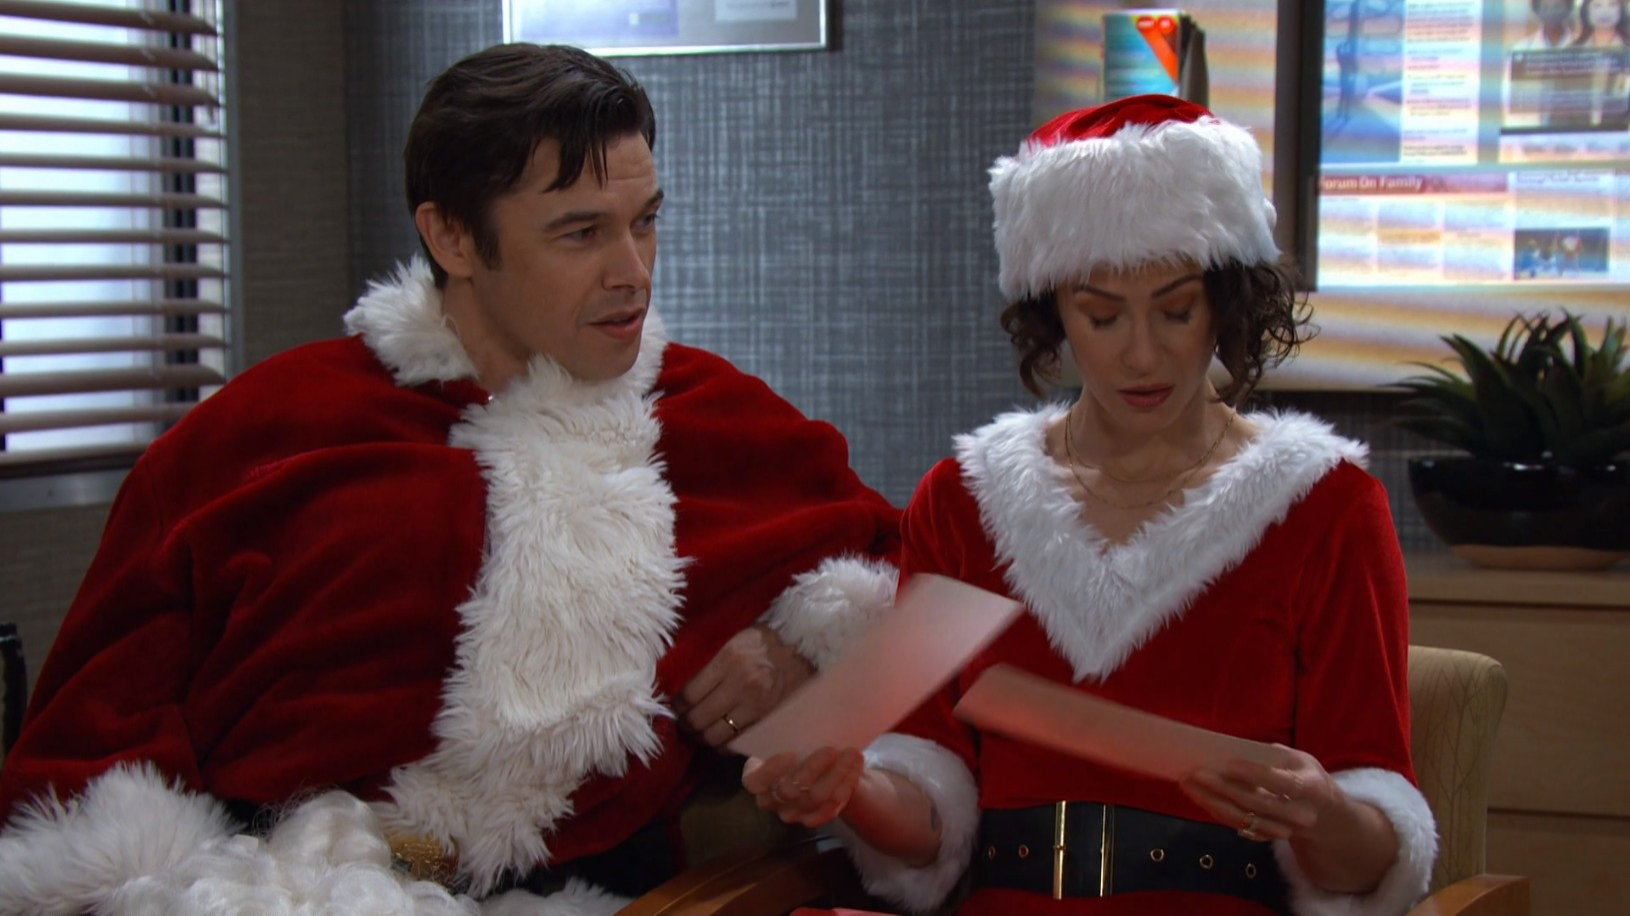 xander gives sarah gift christmas in hospital Days recap SoapsSpoilers